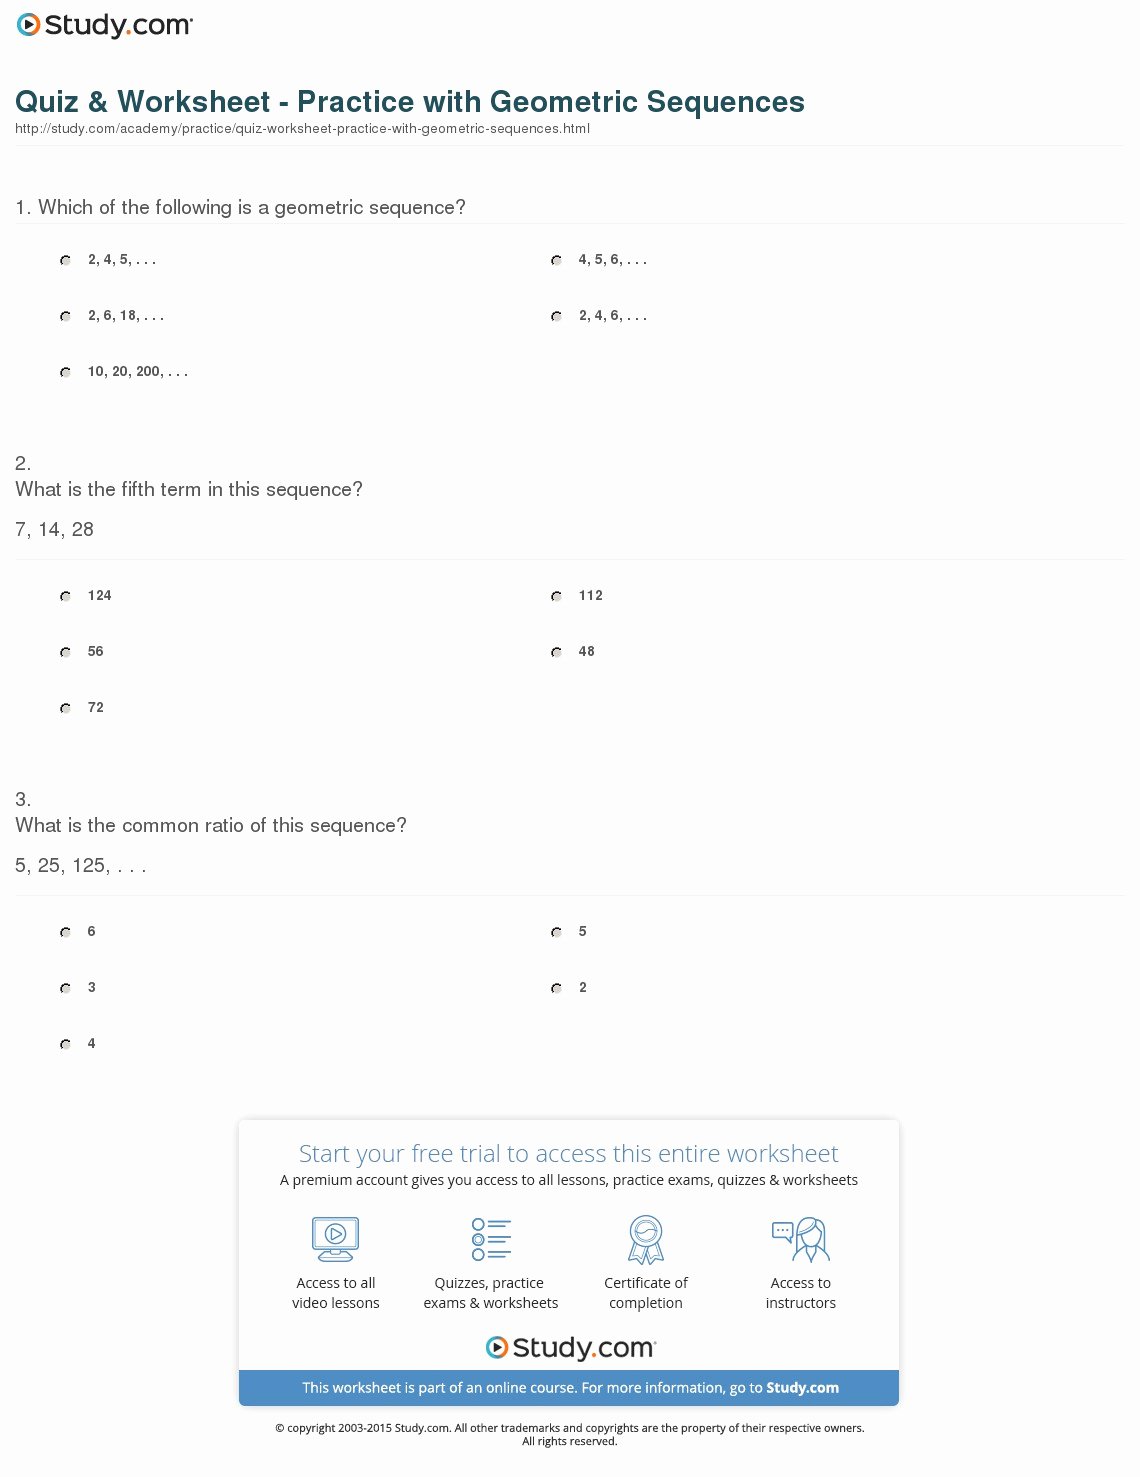 Geometric Sequence Worksheet Answers Luxury Quiz &amp; Worksheet Practice with Geometric Sequences